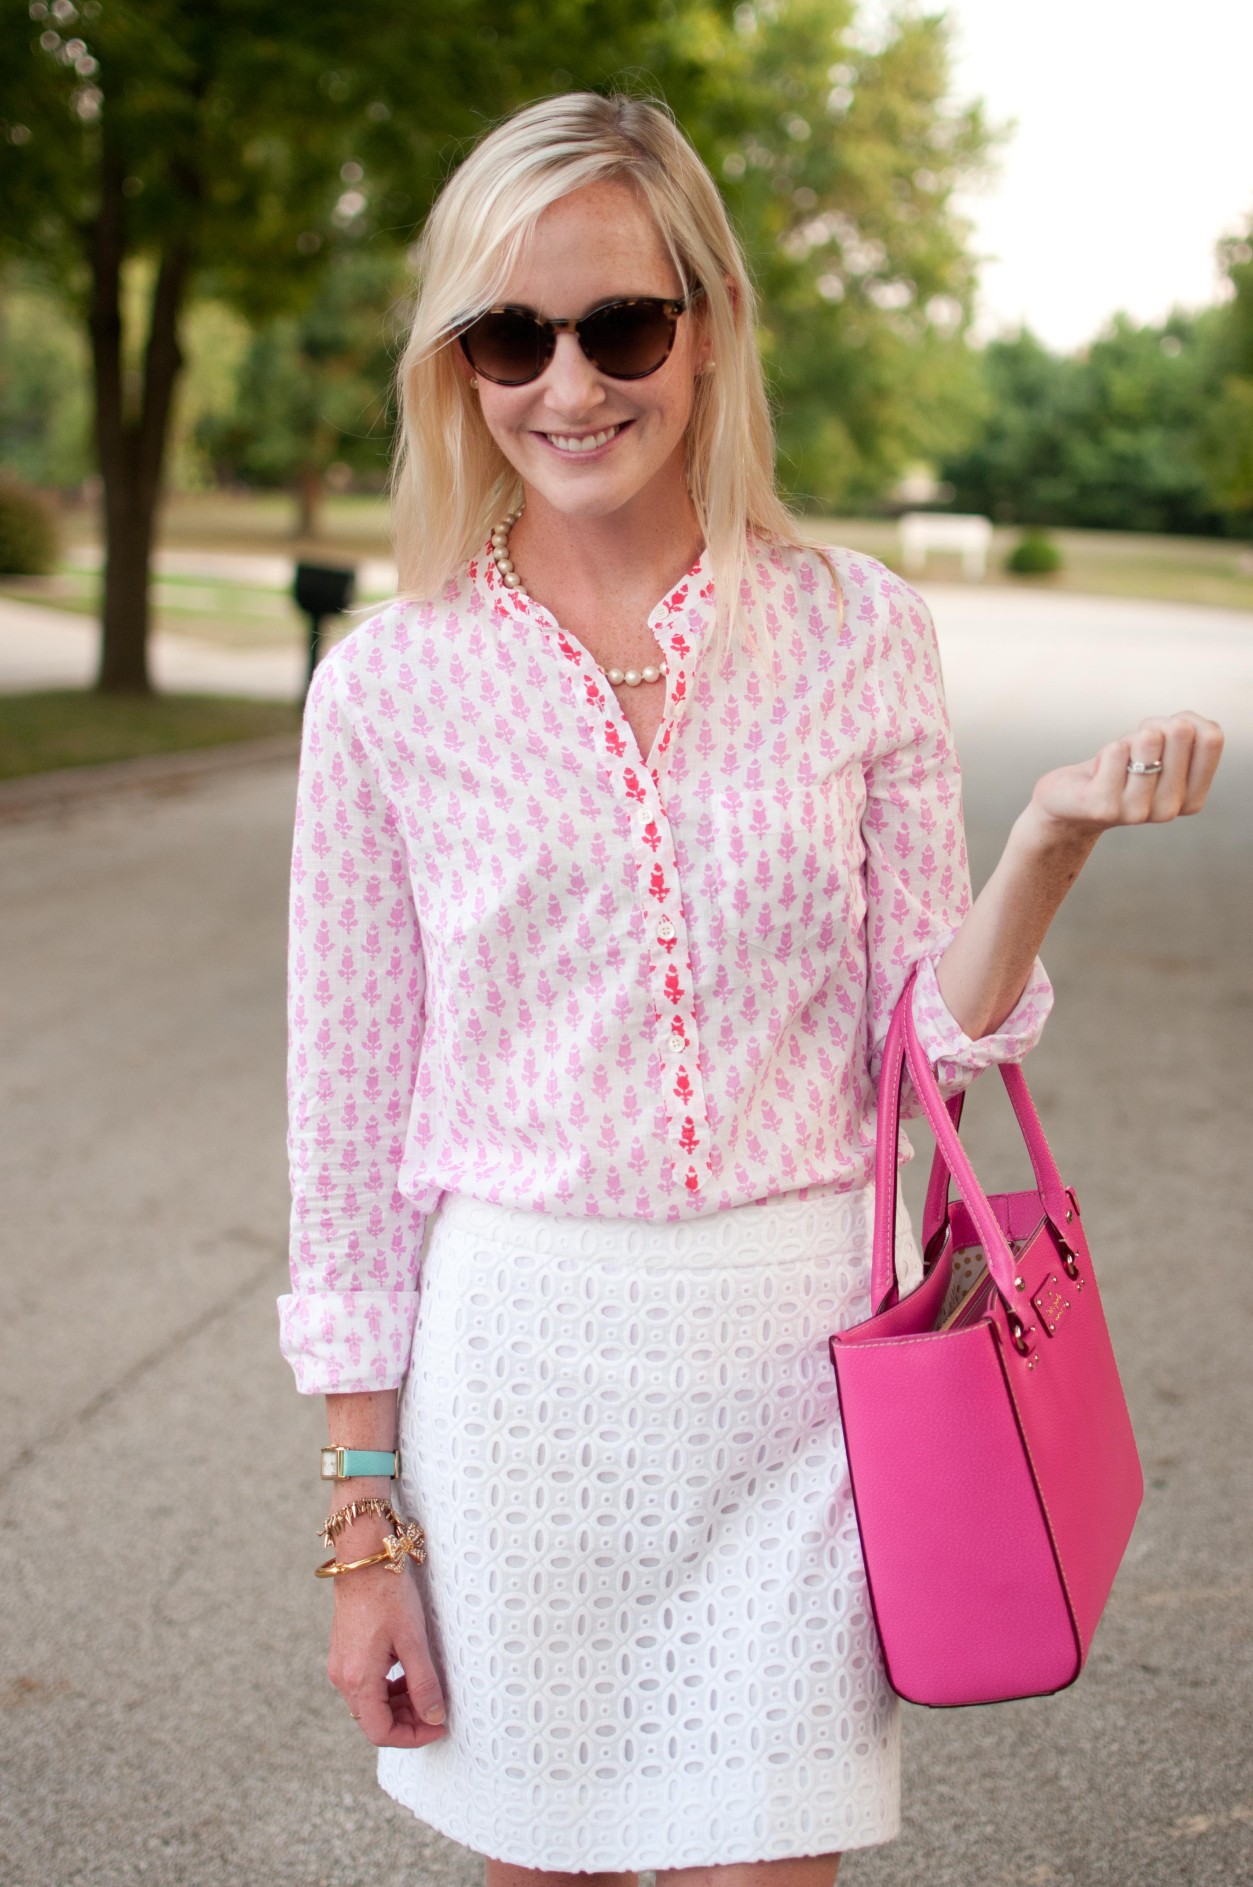 NYC Girl in the Midwest: Eyelet Skirts, Patterned Tops and Hot Pink Bags